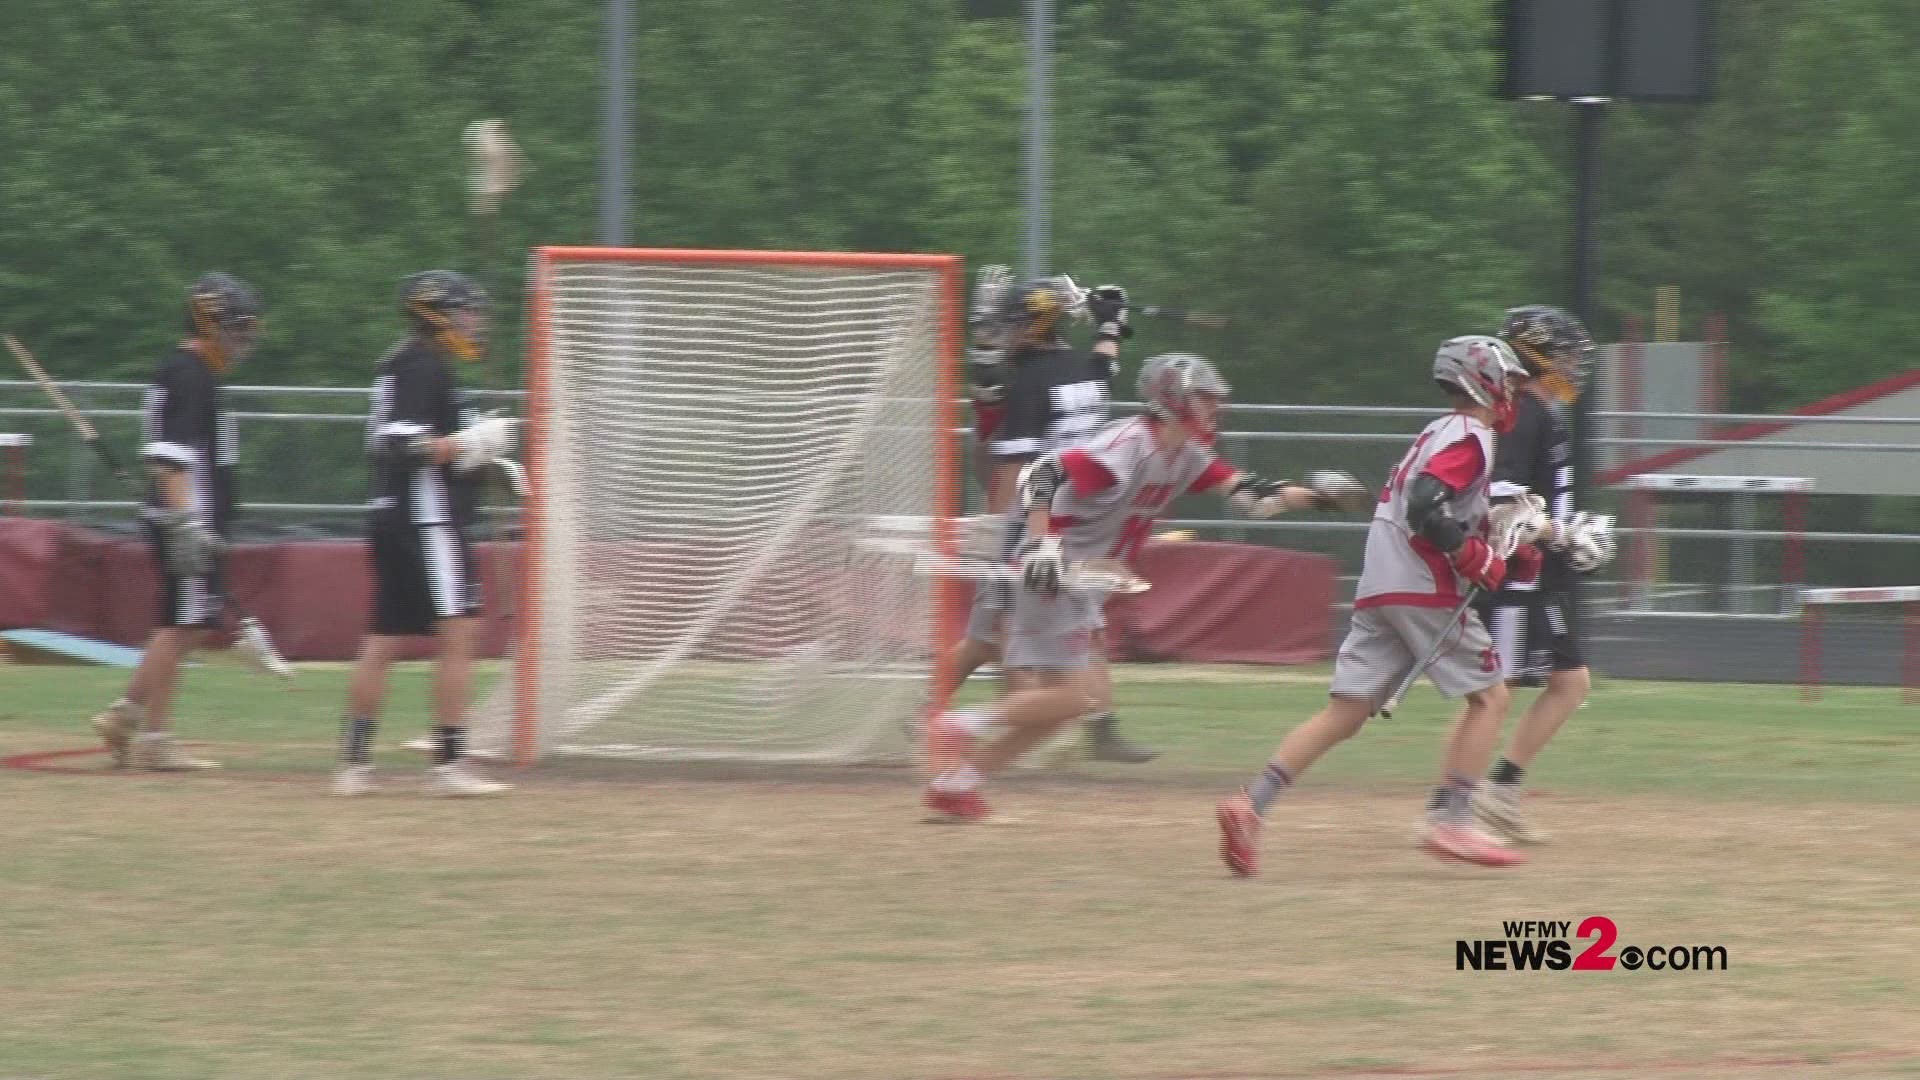 Northwest Guilford's boys lacrosse team topped R.J. Reynolds 20-11 to advance to the semifinals of this year's state playoffs.